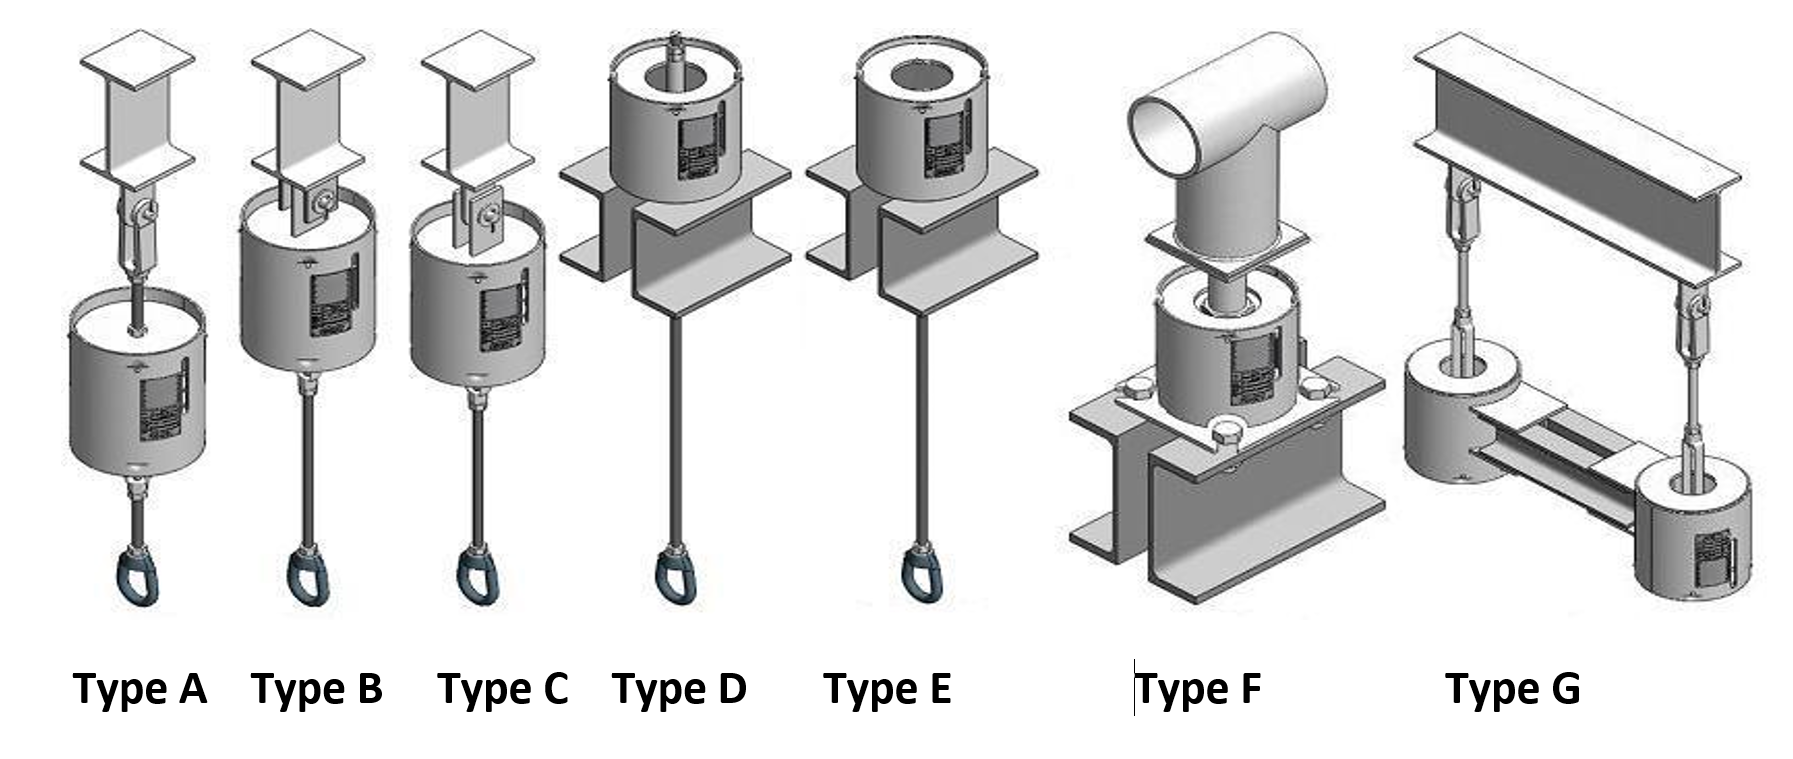 Support terms. Variable Spring support. Hanger Pipe support. Type support. Pipe Hanger Types.